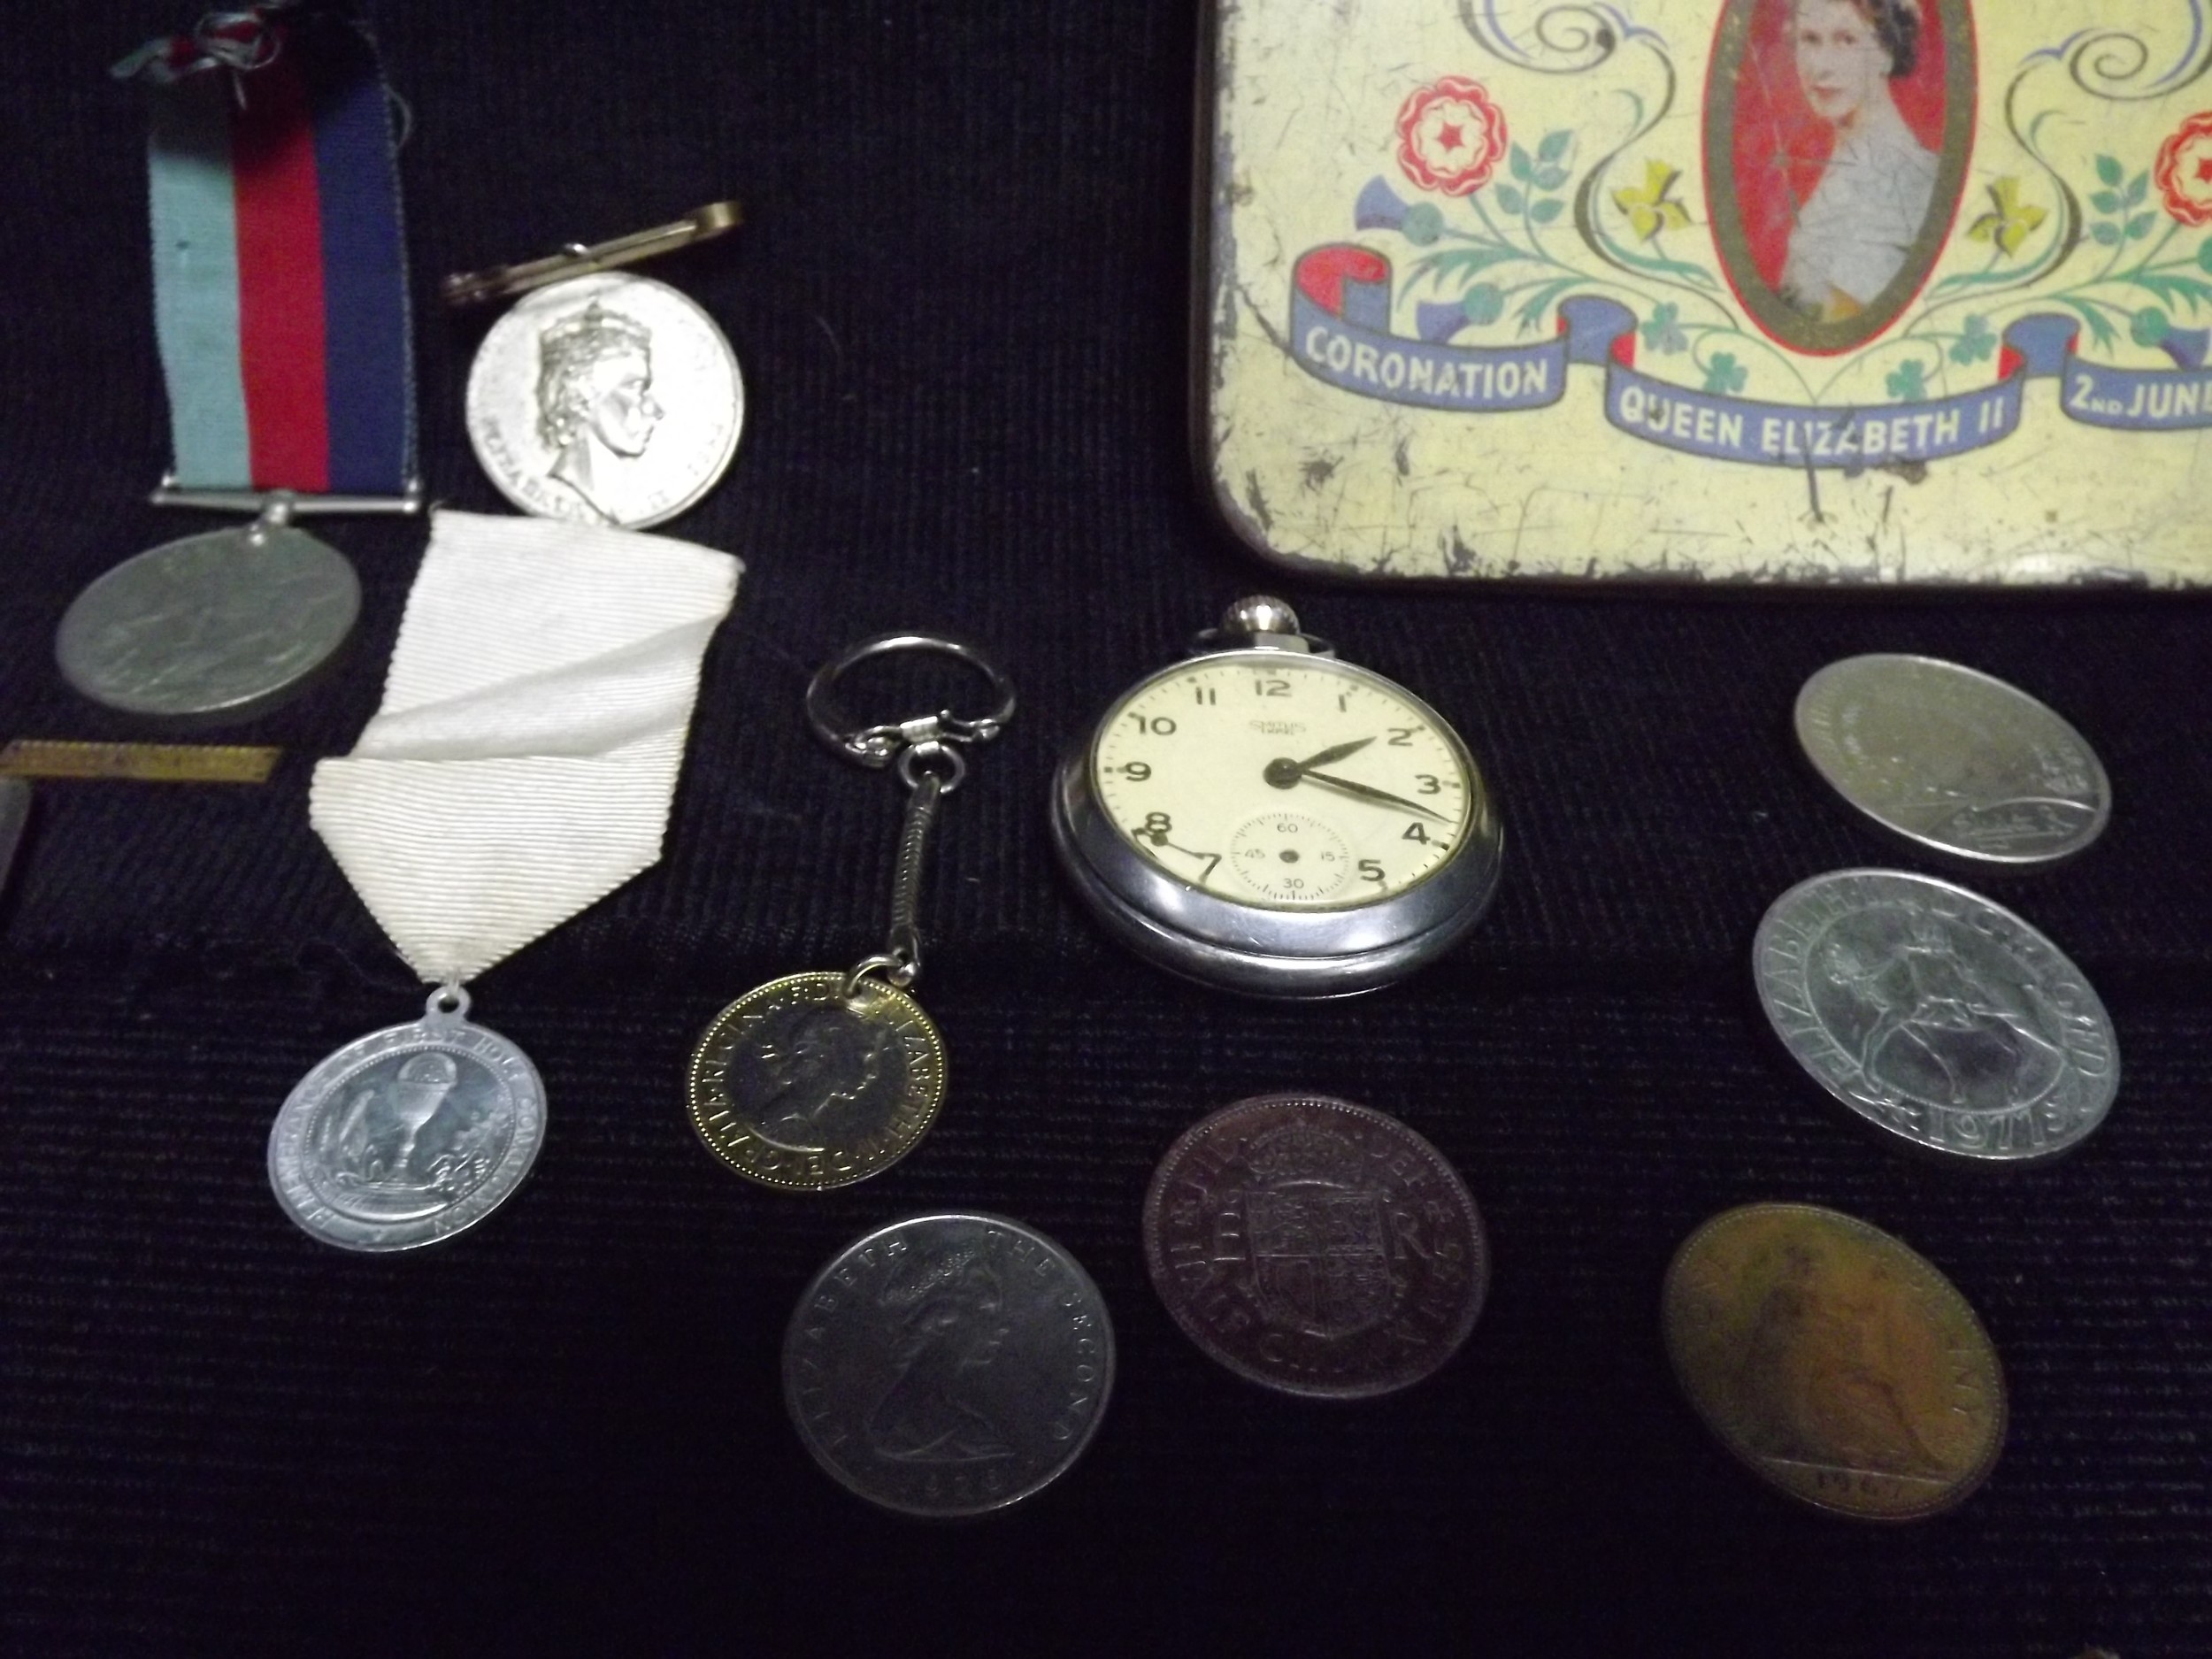 GB - Gentlemen's collection of Medals, Coins, Stamps, Pocket Watch, Metal cased Moniker Stamp and - Image 5 of 8